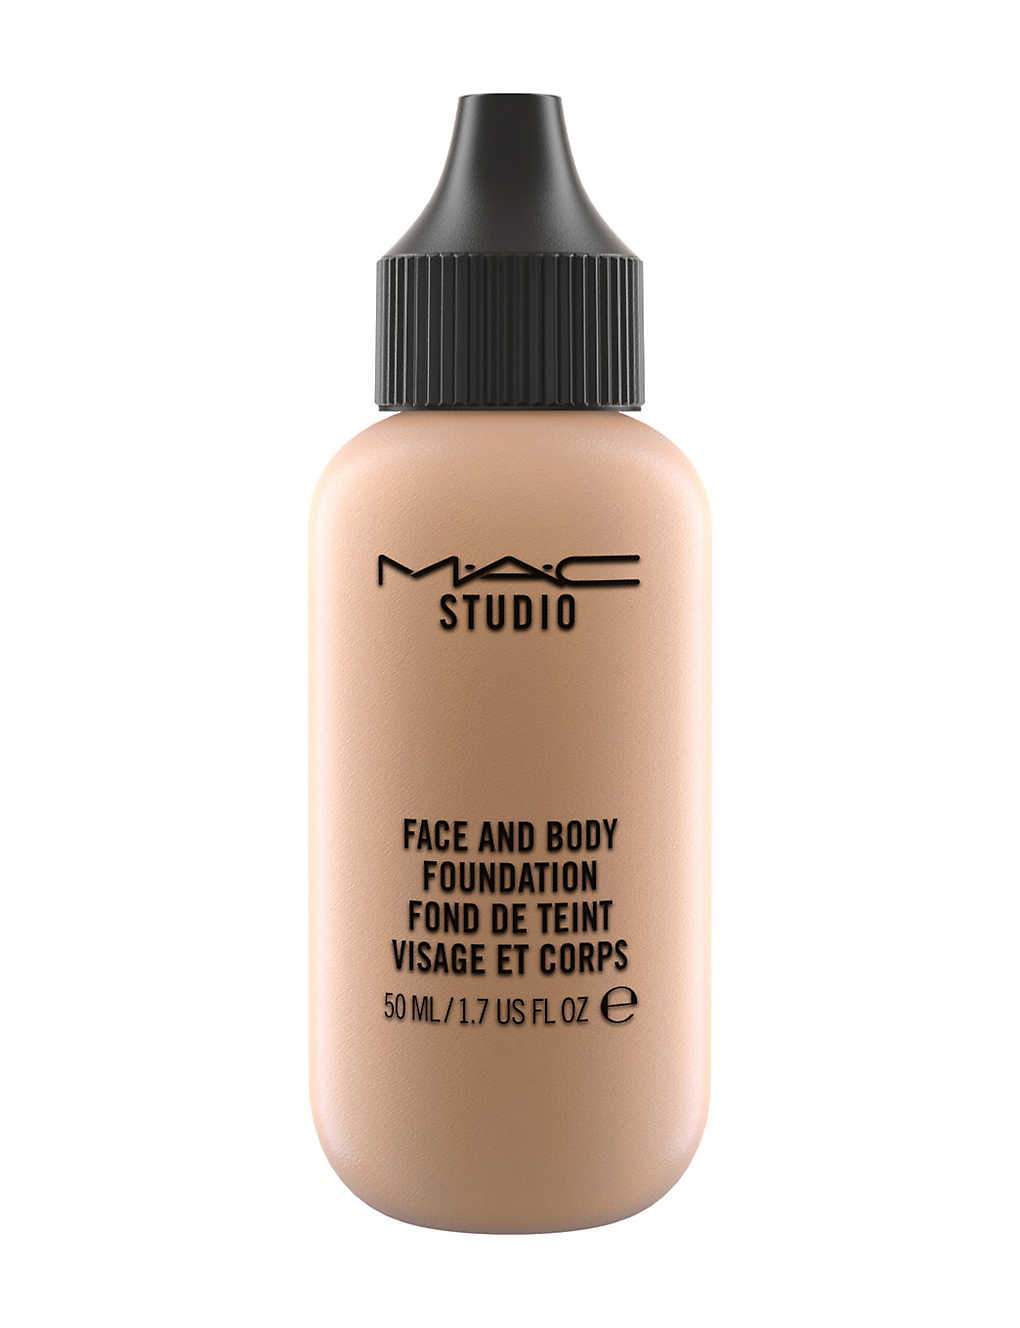 MAC Face and Body Foundation - C7, foundation, London Loves Beauty